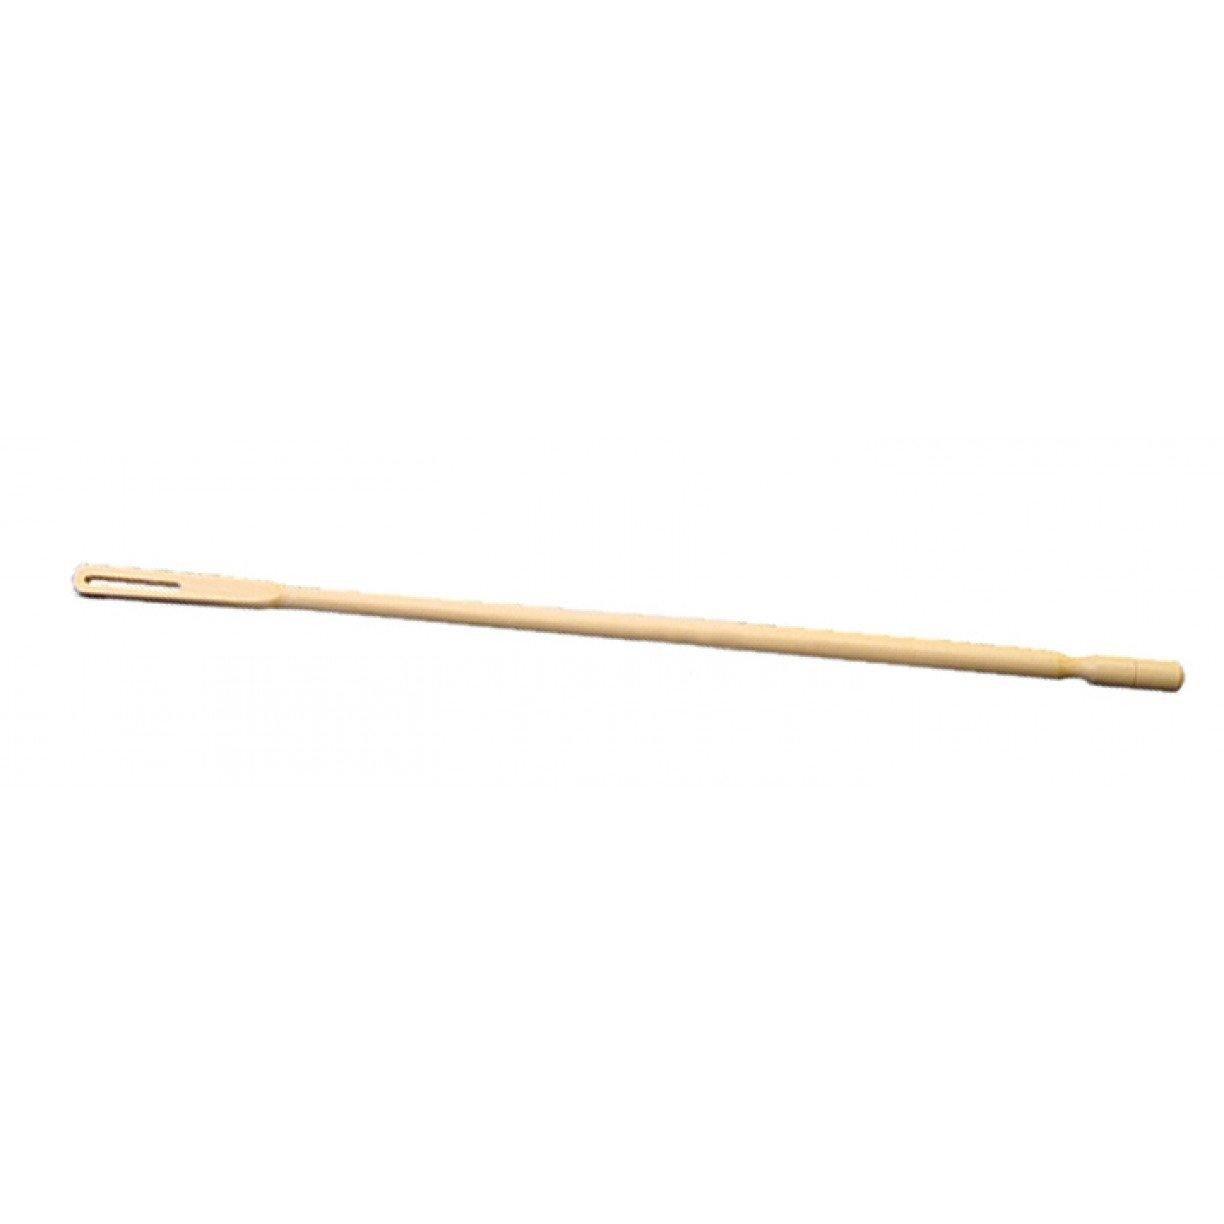 Flute Cleaning Rod - Maple 35cm - Orchestral - Woodwind - Accessories by AMS at Muso's Stuff